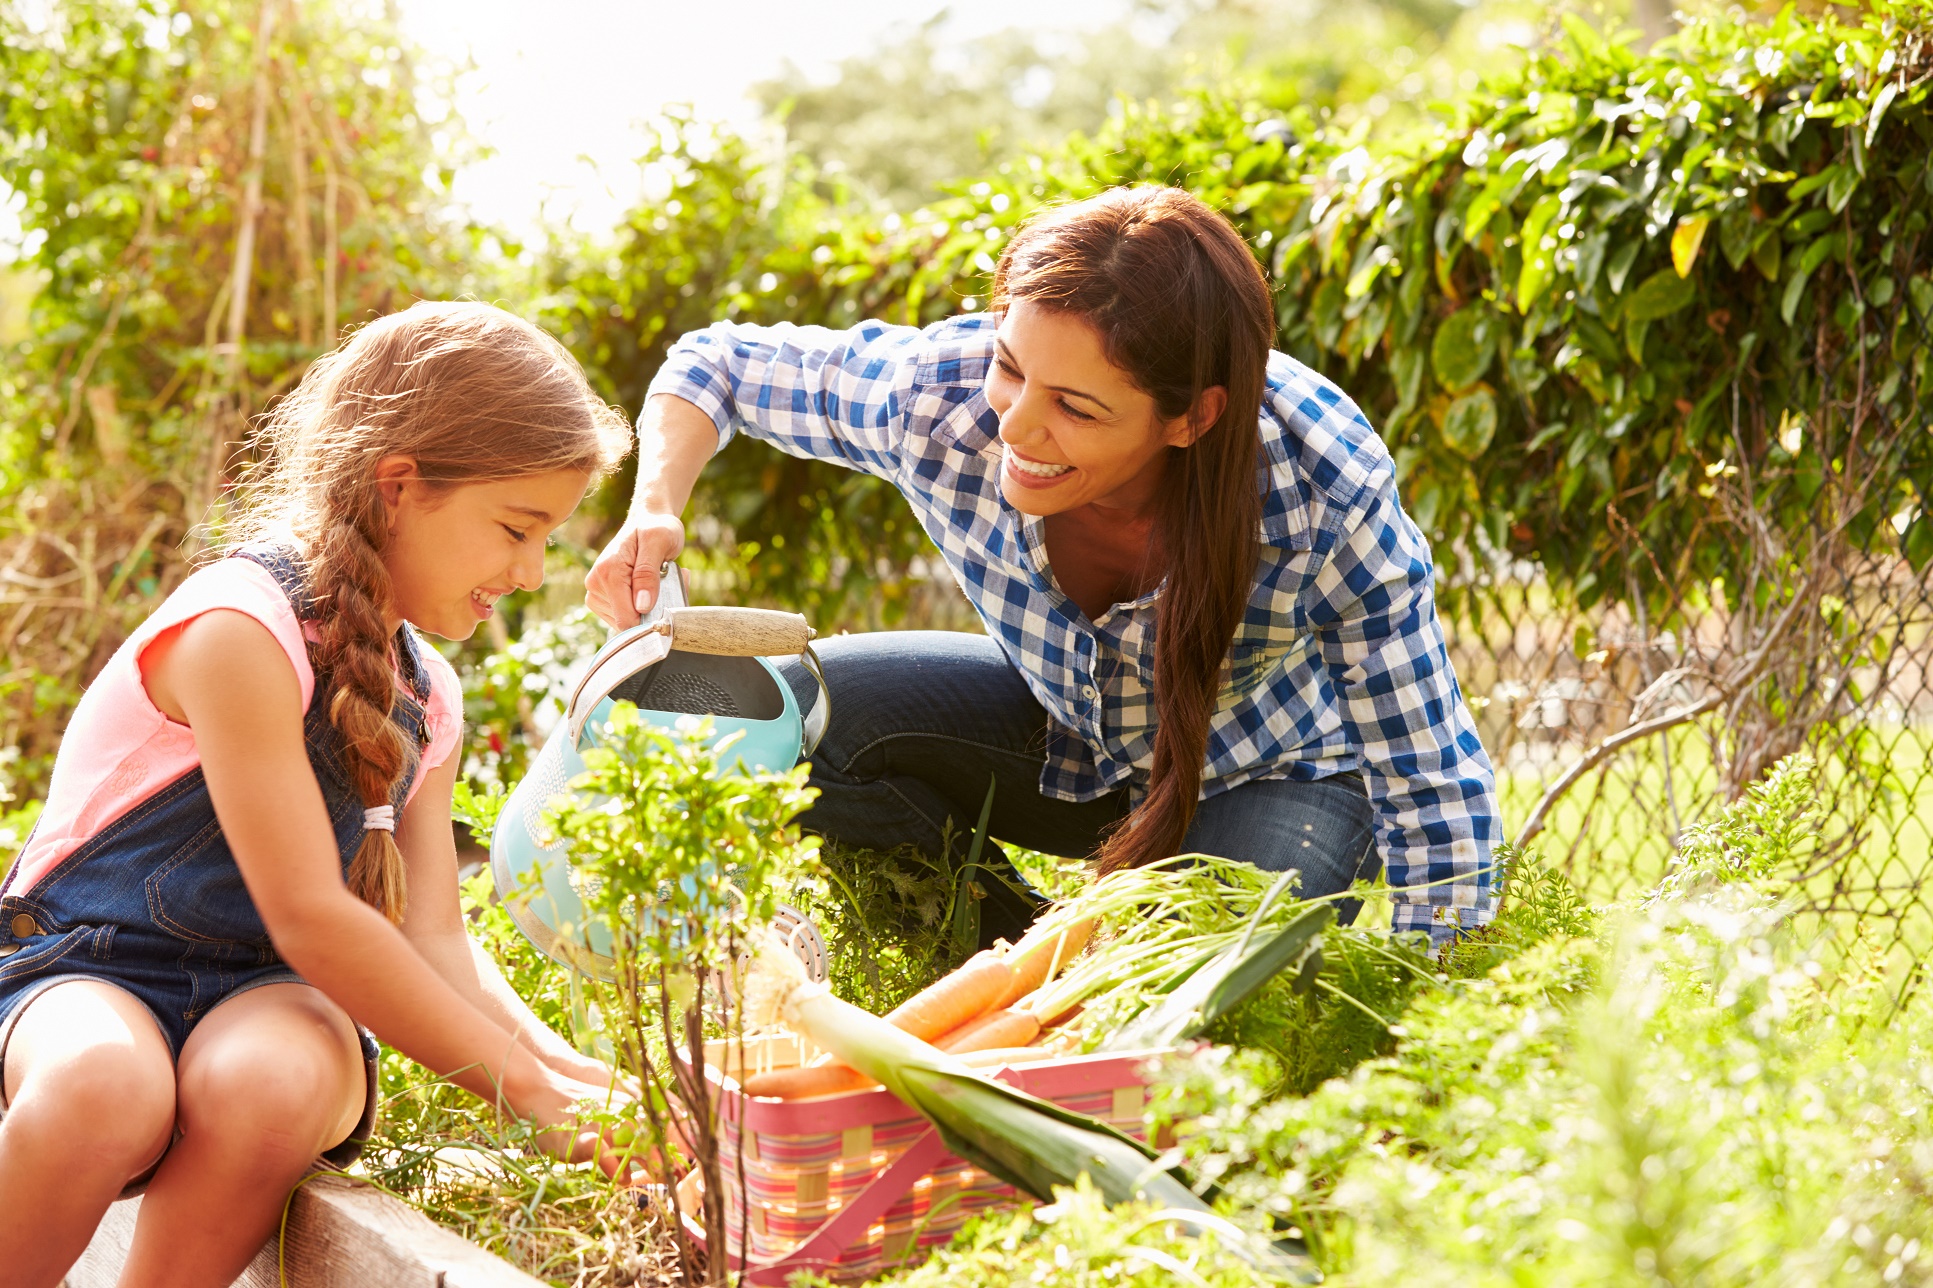  Family  gardening provides more than bountiful harvest 